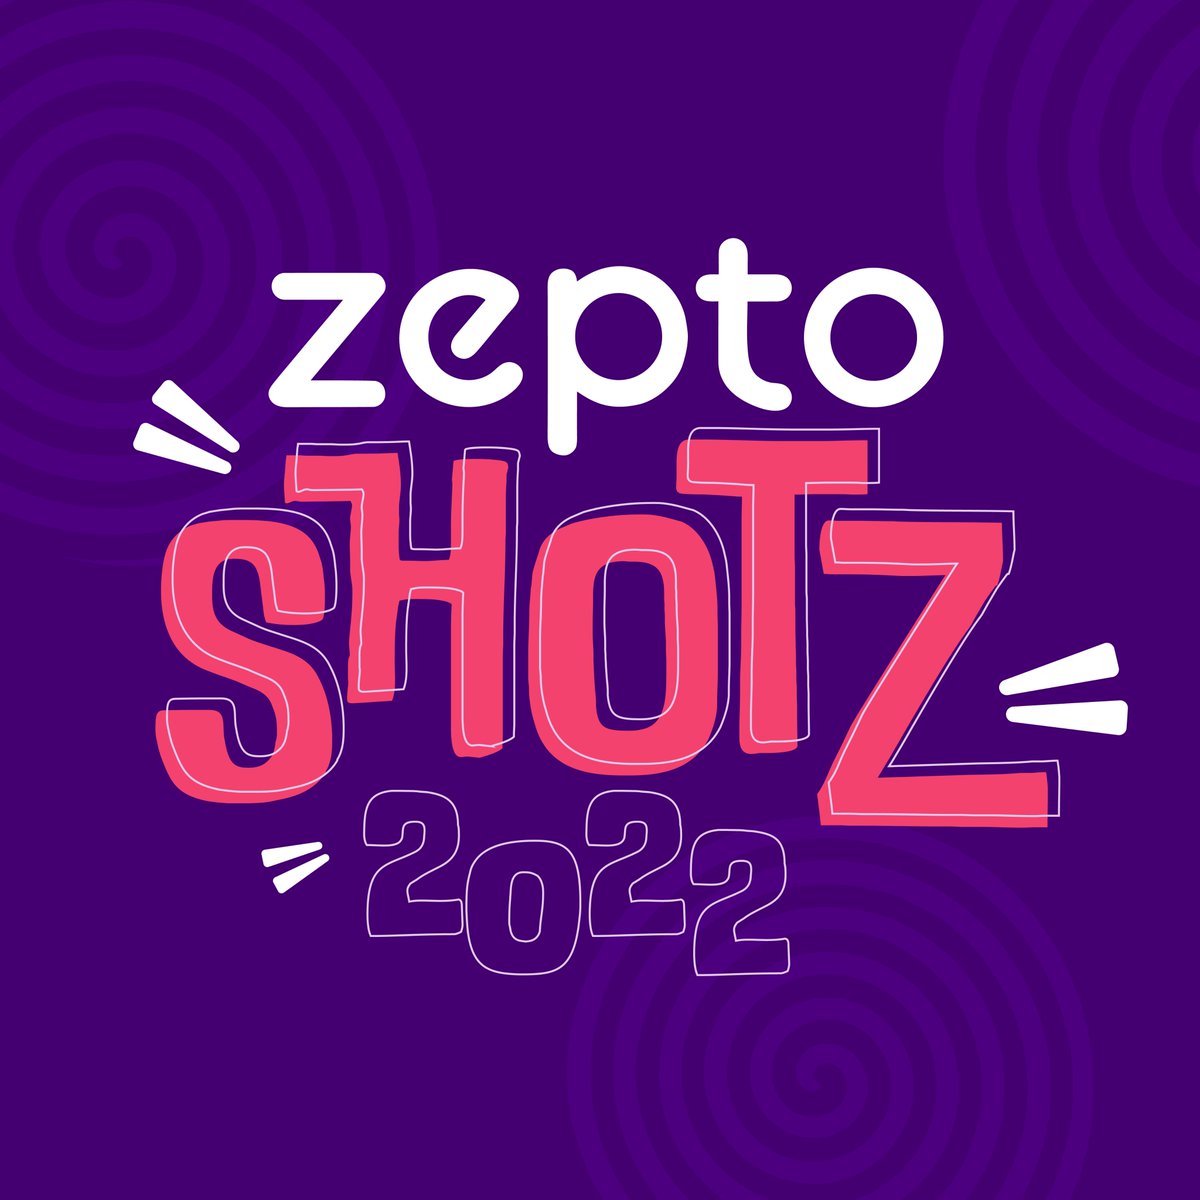 Here’s to painting even more towns and hearts purple this year 💜
Cheers to 2022, a year that it was!

#ZeptoNow #ZeptoIn10 #Recap2022 #Goodbye2022 #NewYear2023 #NewYear #NewUs